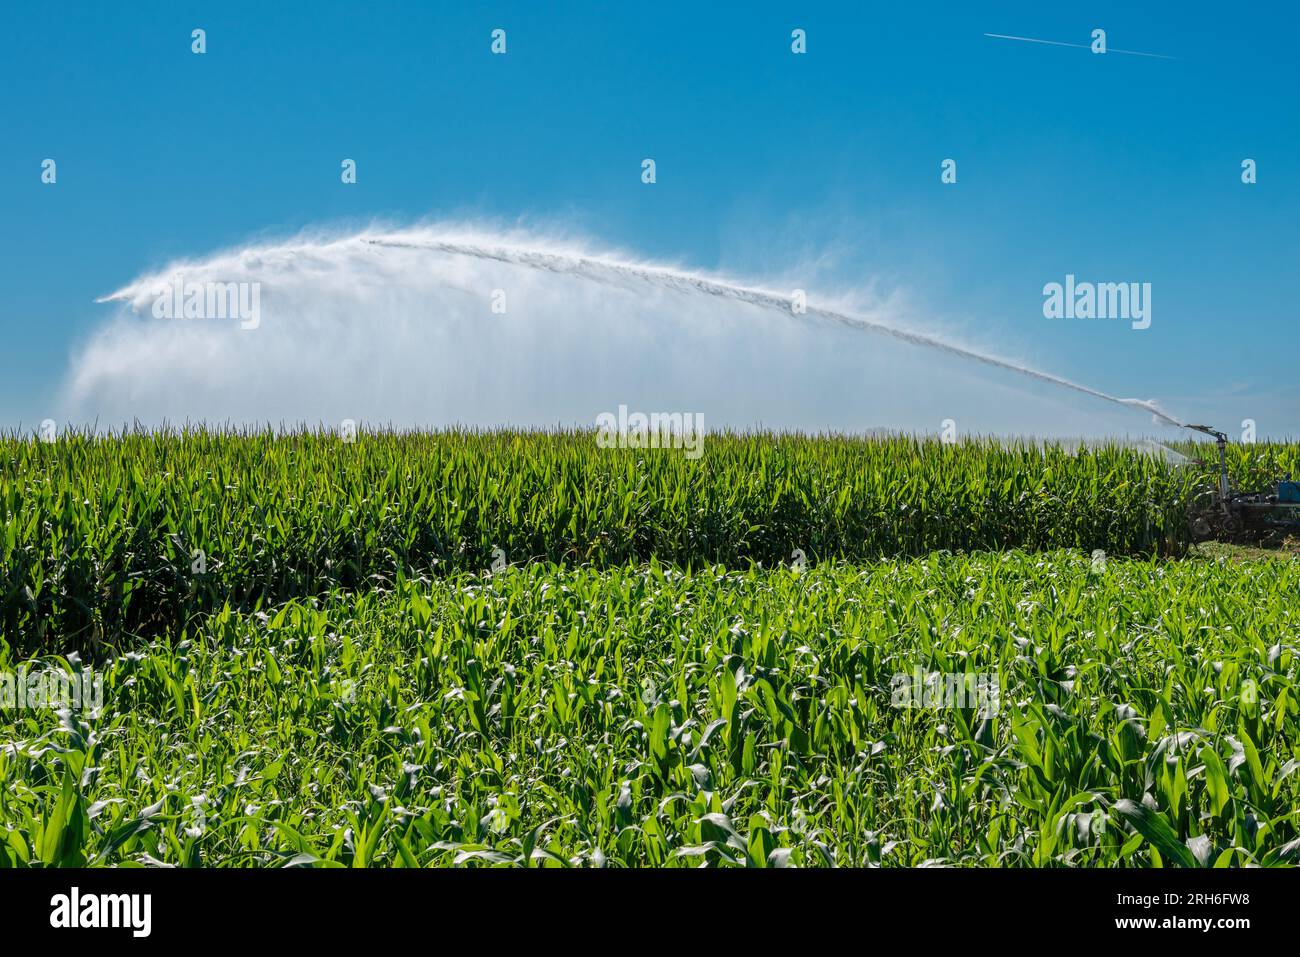 Spraying water from the irrigation system on a corn field in the Po Valley in the province of Cuneo, Italy, in summer on blue sky Stock Photo